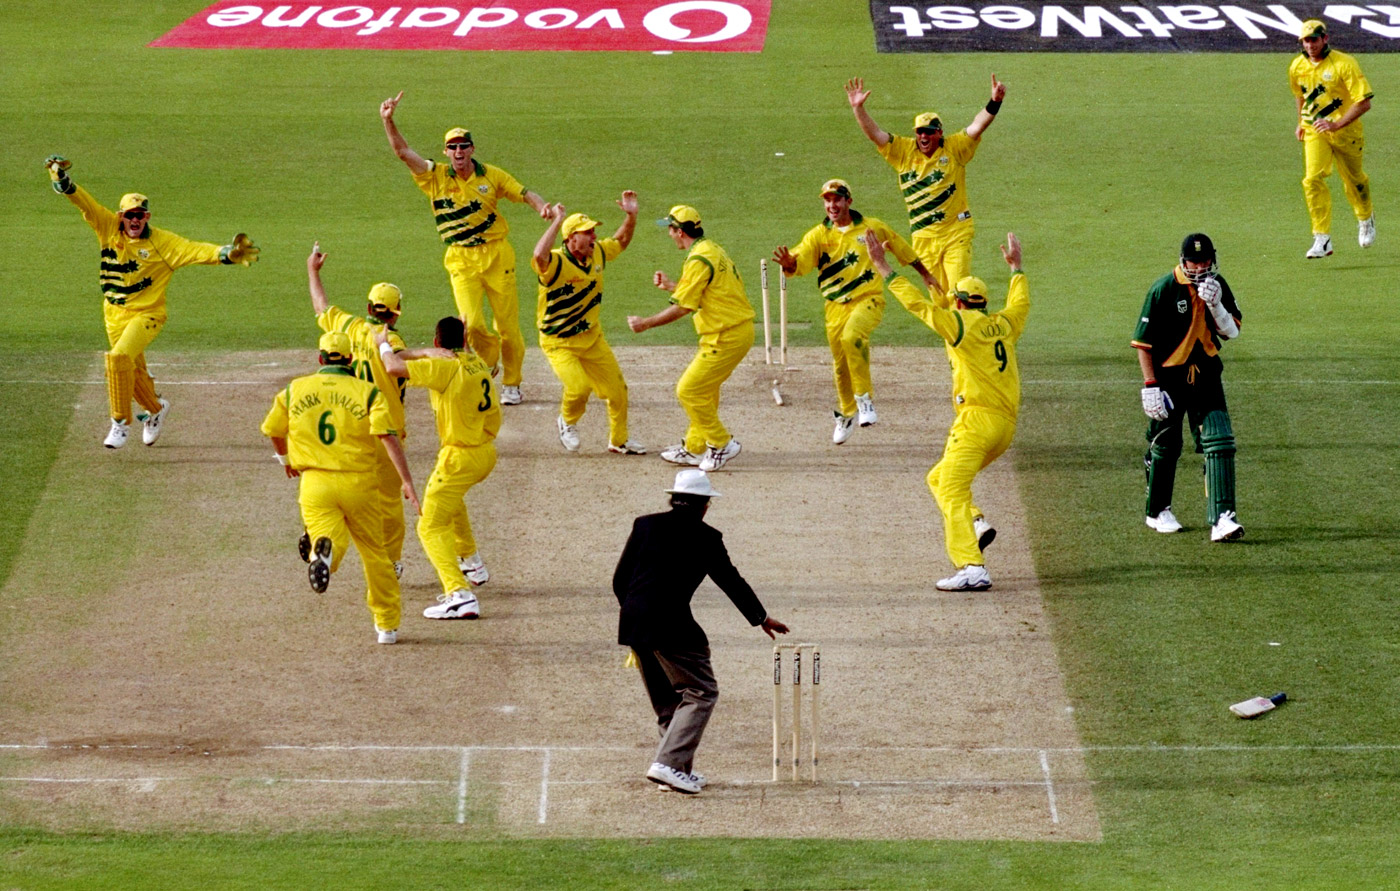 Australian players ecstatic after the run-out.